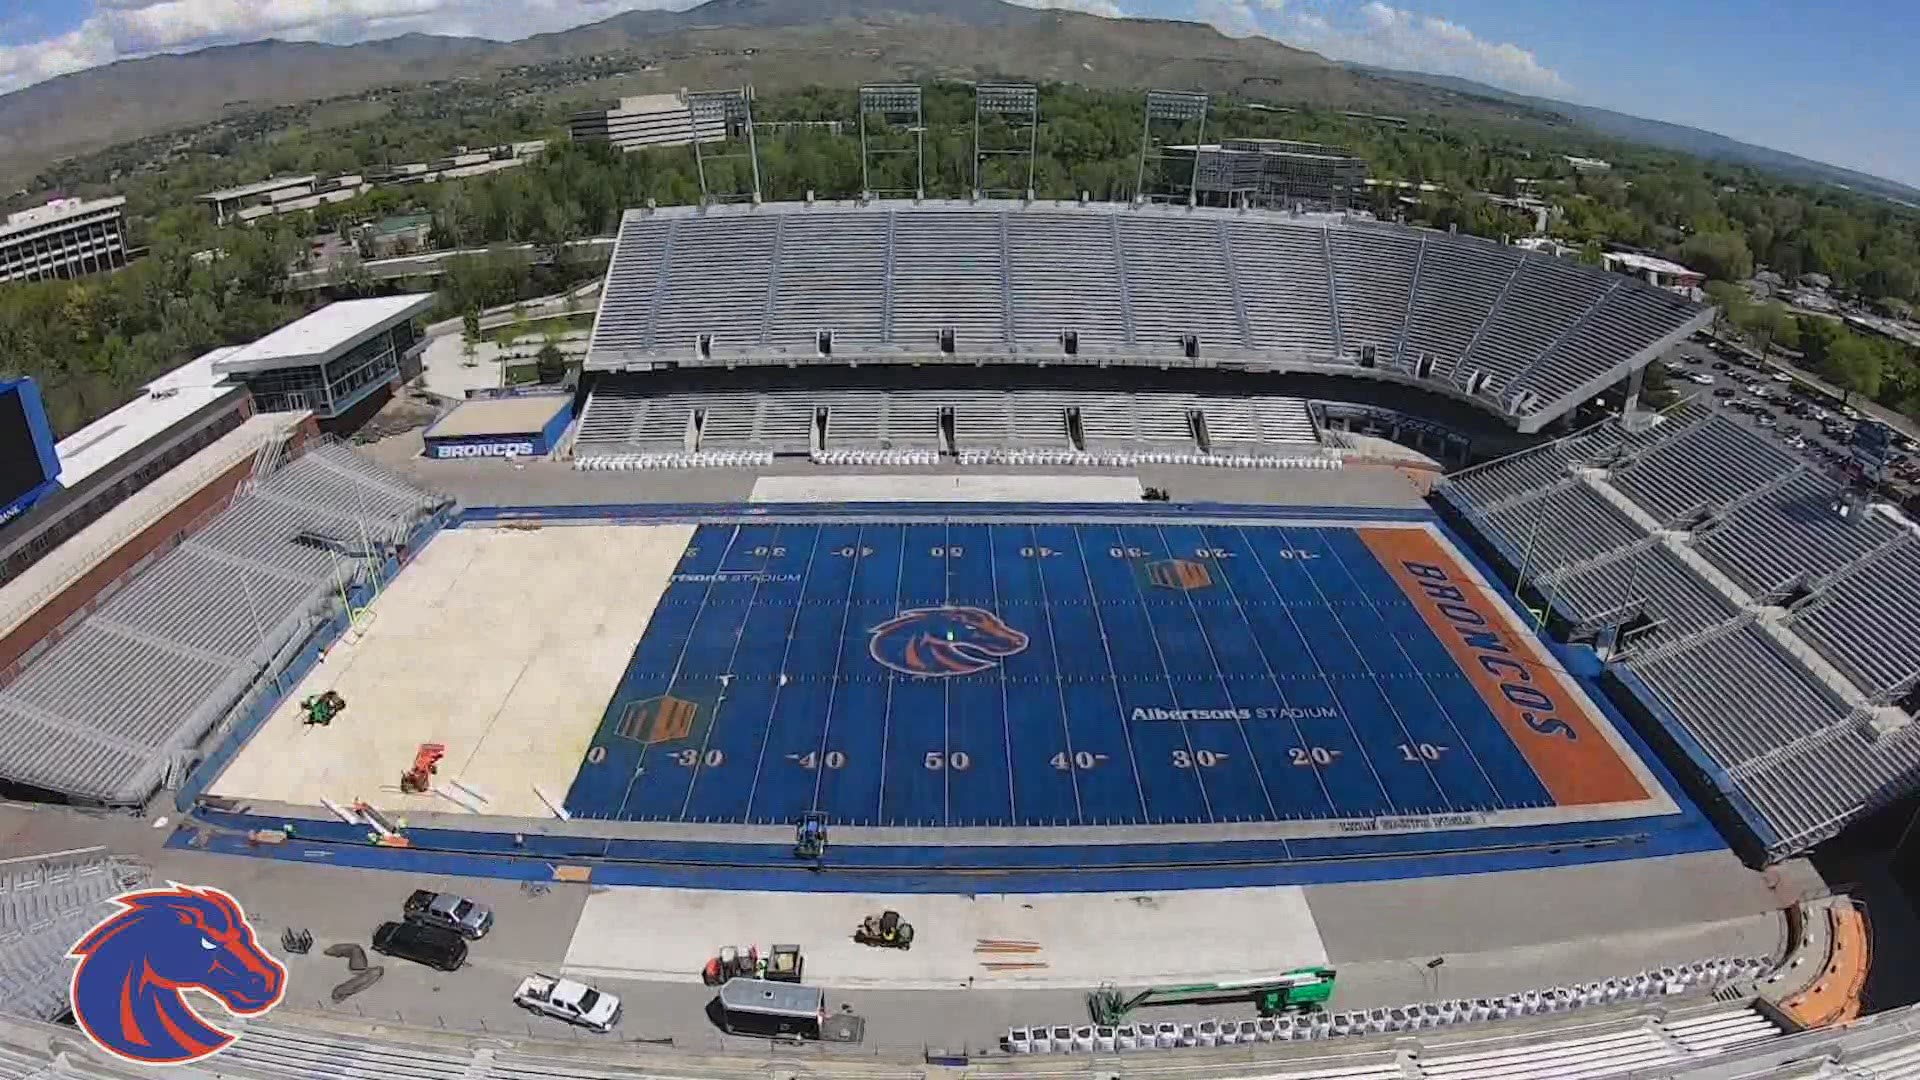 Timelapse shows installation of Boise State's blue turf